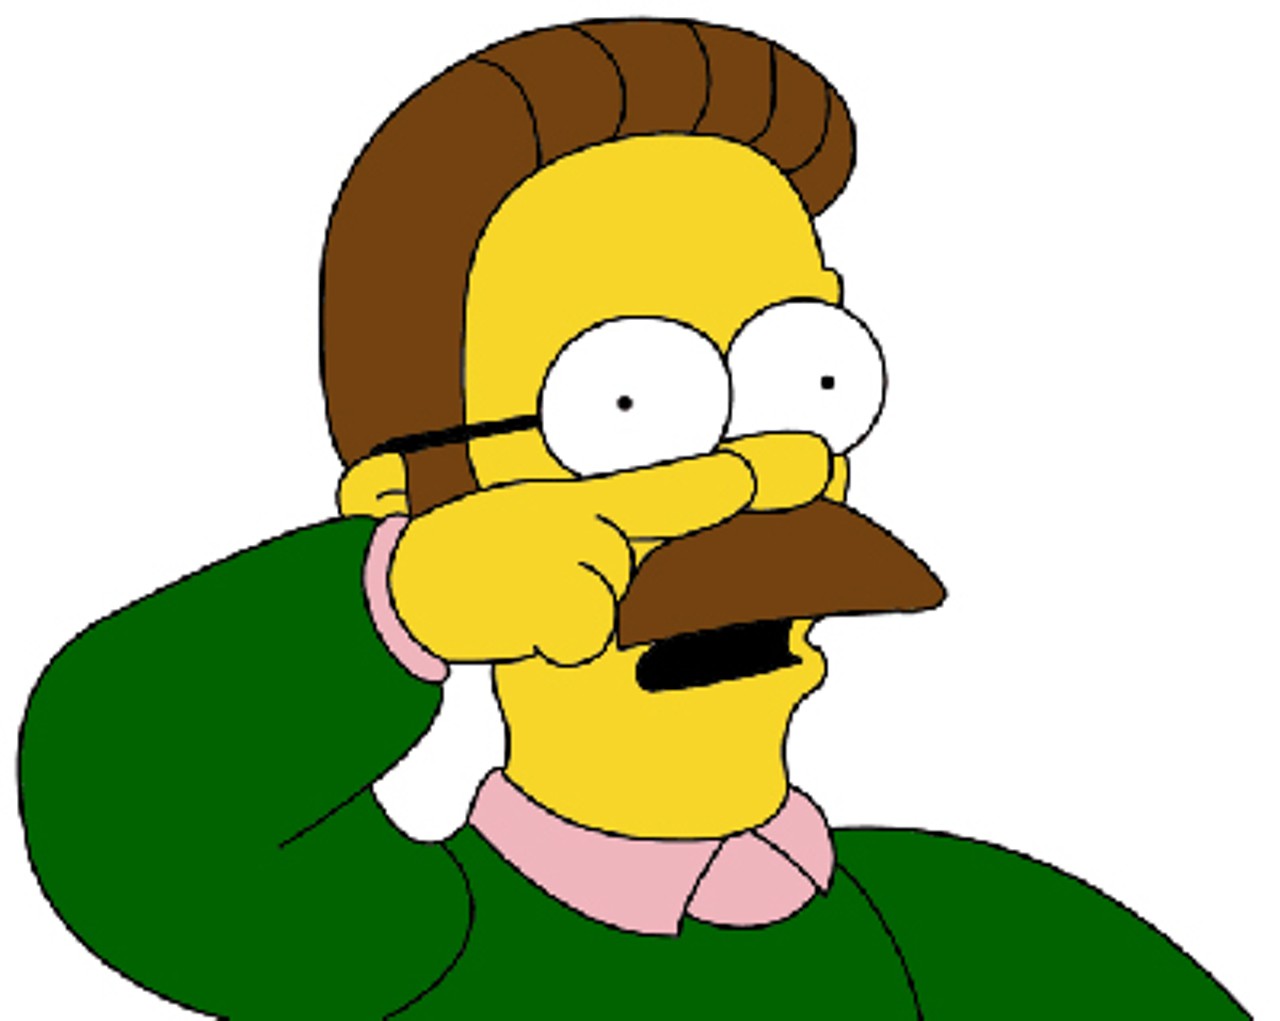 Ned Flanders: "A devout and sometimes overbearing Christian, he is nonetheless amongst the most friendly and compassionate Springfieldians and is generally considered a pillar of the Springfield community."